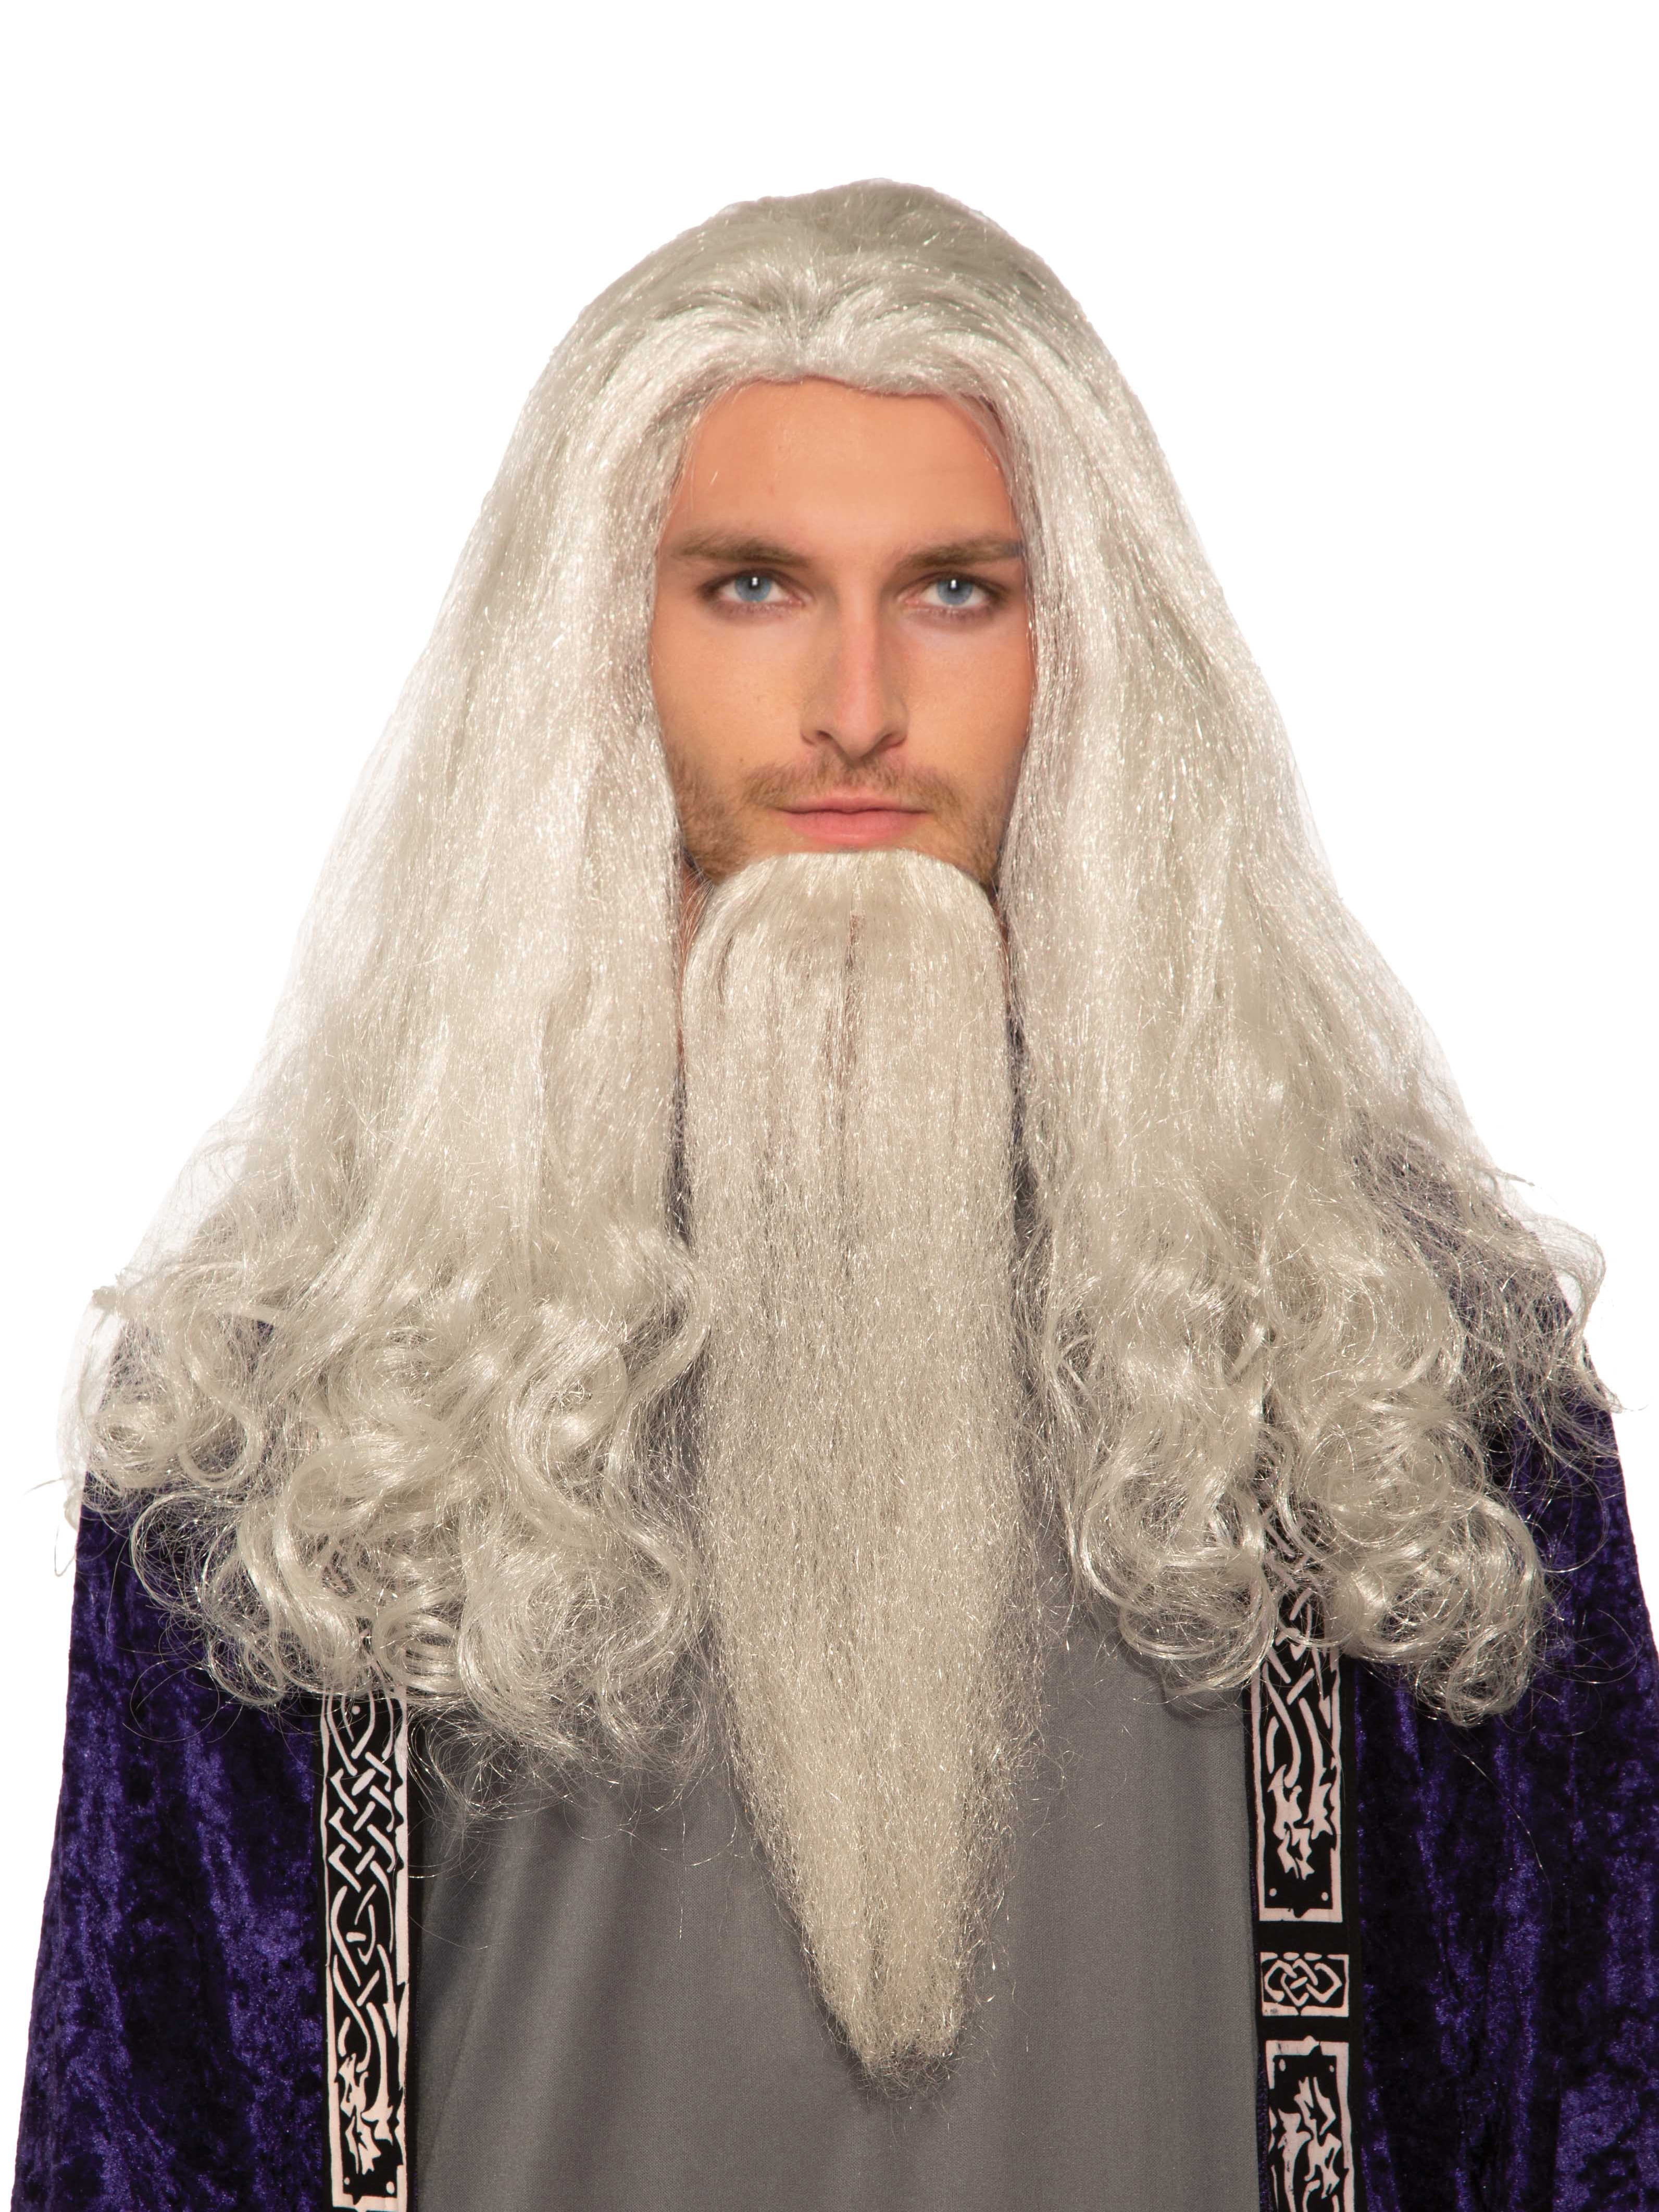 ADULT MEN'S WHITE CURLY WIG WITH BEARD & MOUSTACHE CHARACTER WIG FANCY DRESS 